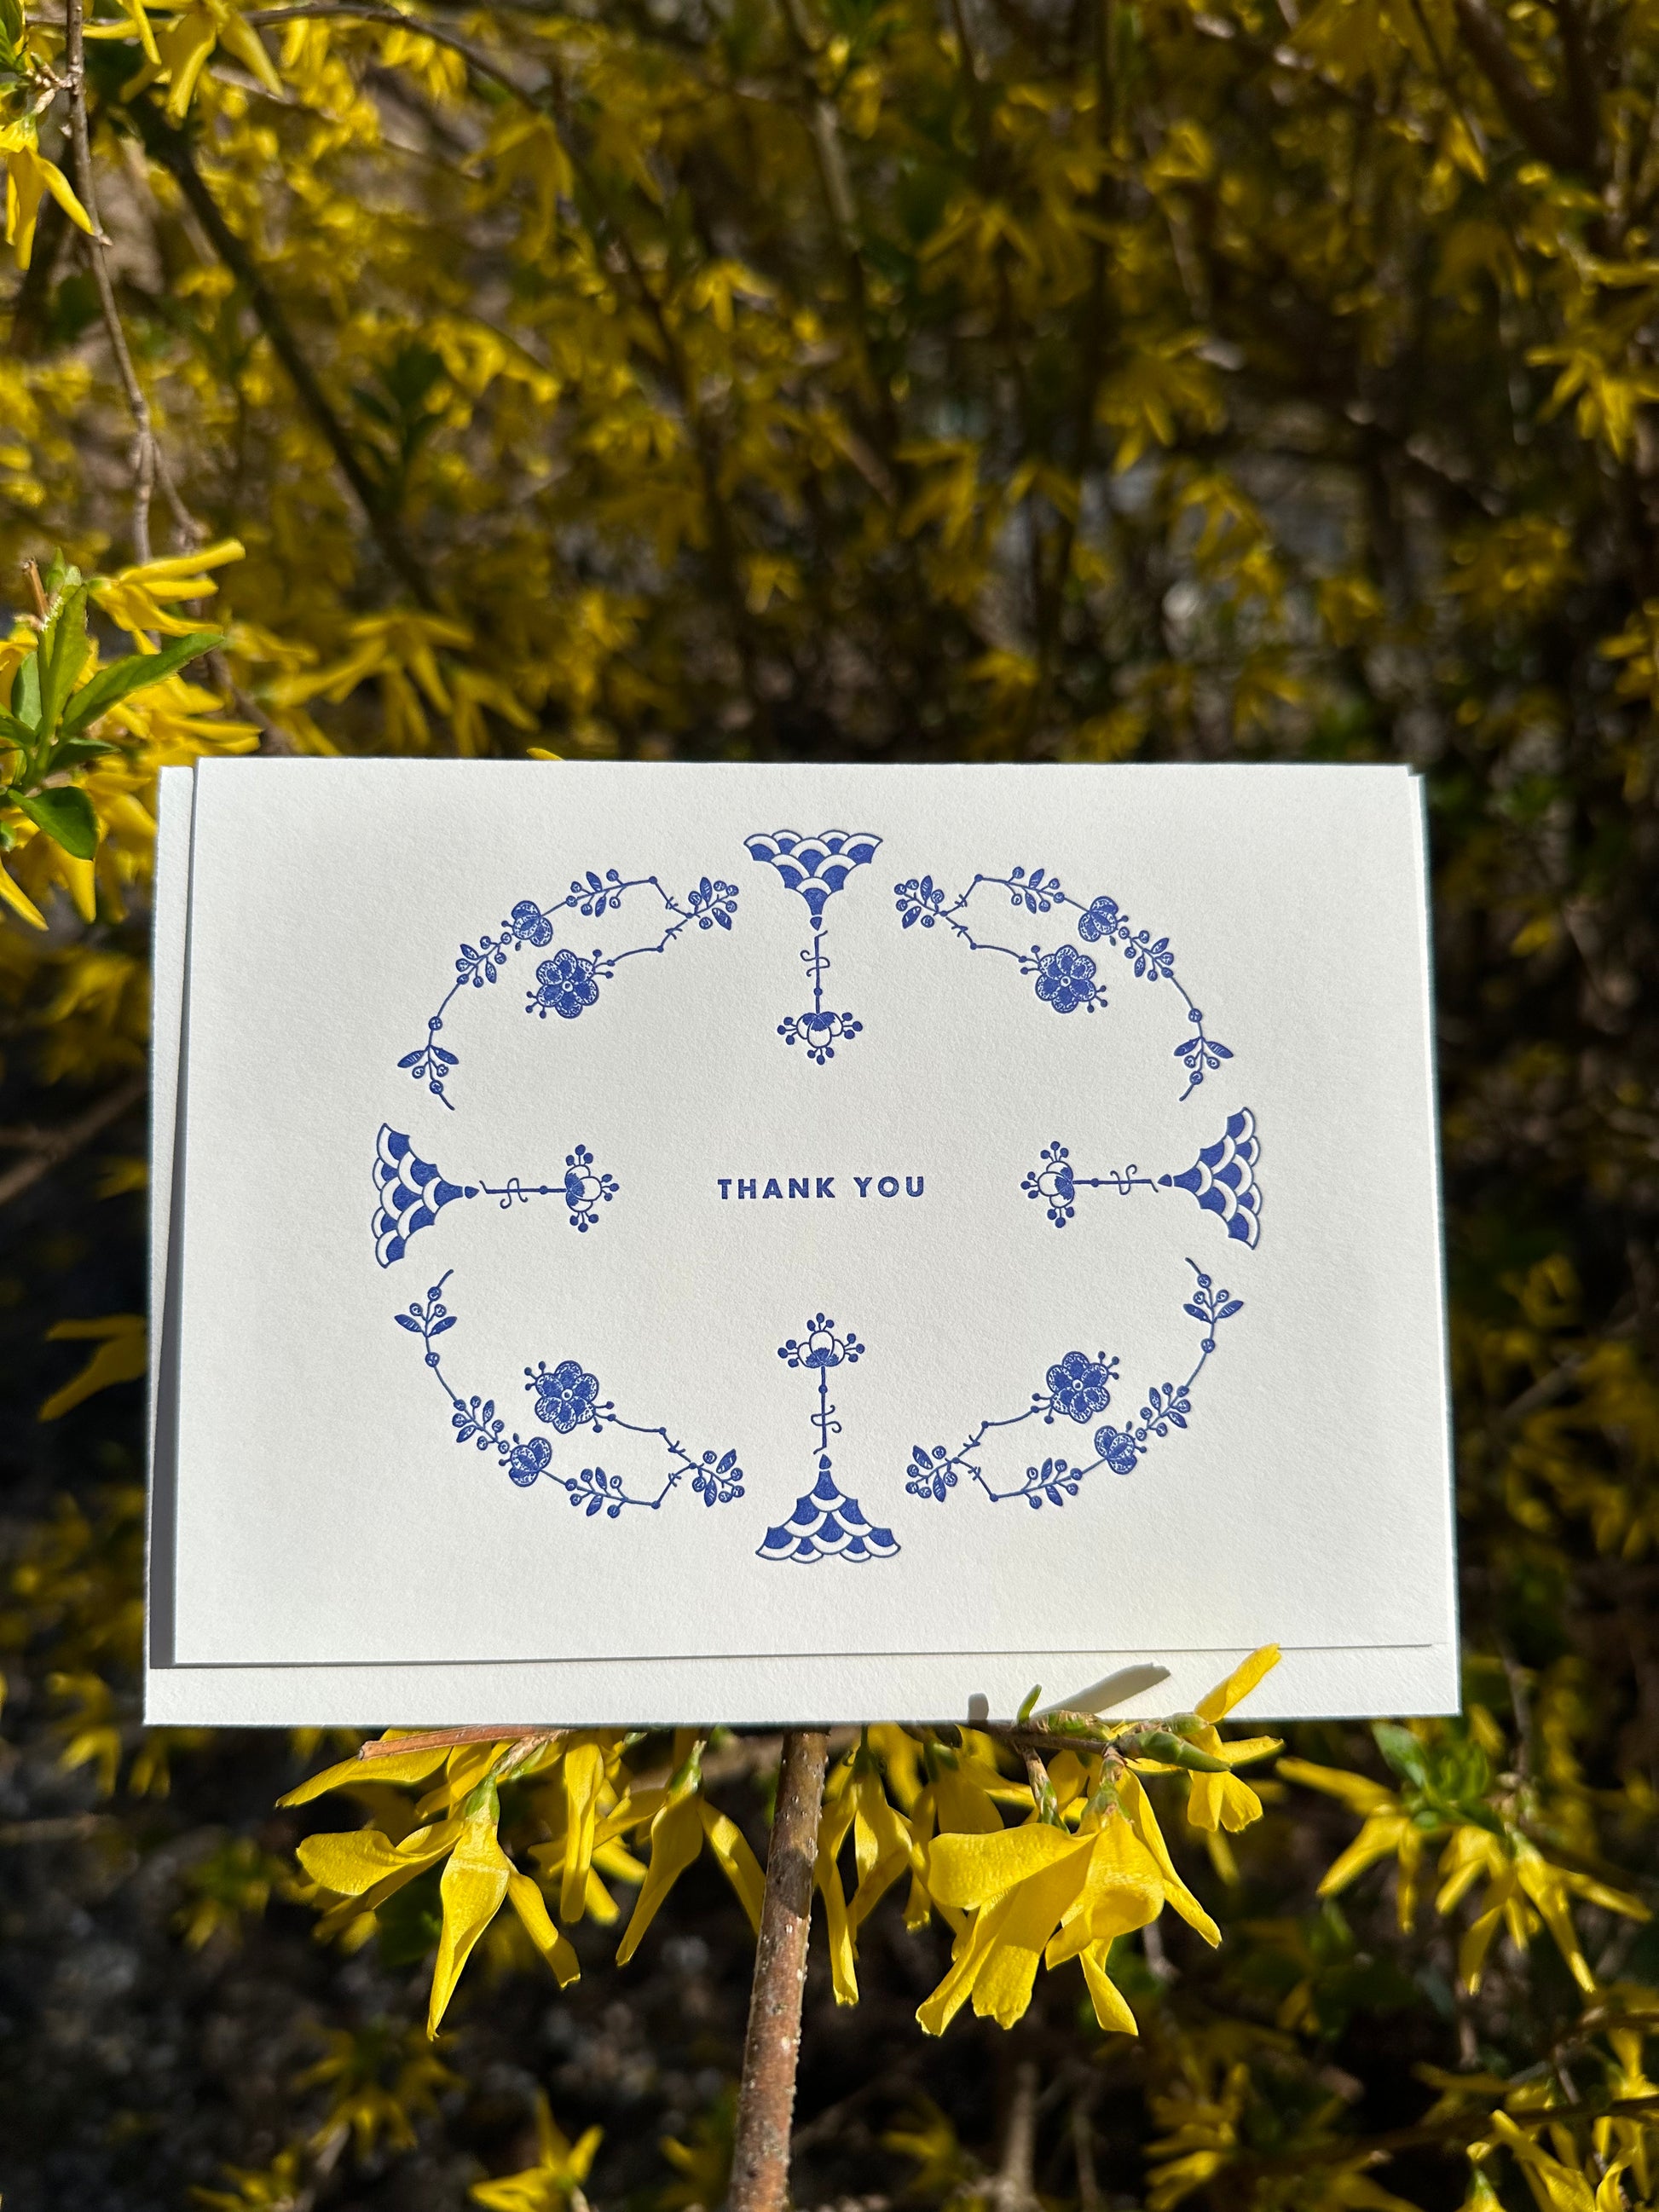 Letterpress greeting card featuring hand-drawn Furnivals Denmark Blue china pattern design, printed in a vibrant royal blue ink. Text saying "thank you" is shown centered on the card, in the same blue ink. The card is white, blank inside, and is paired with a white cotton envelope. Design is similar to Royal Copenhagen.  The card is shown on a blooming forsythia bush, outside on a sunny spring day.